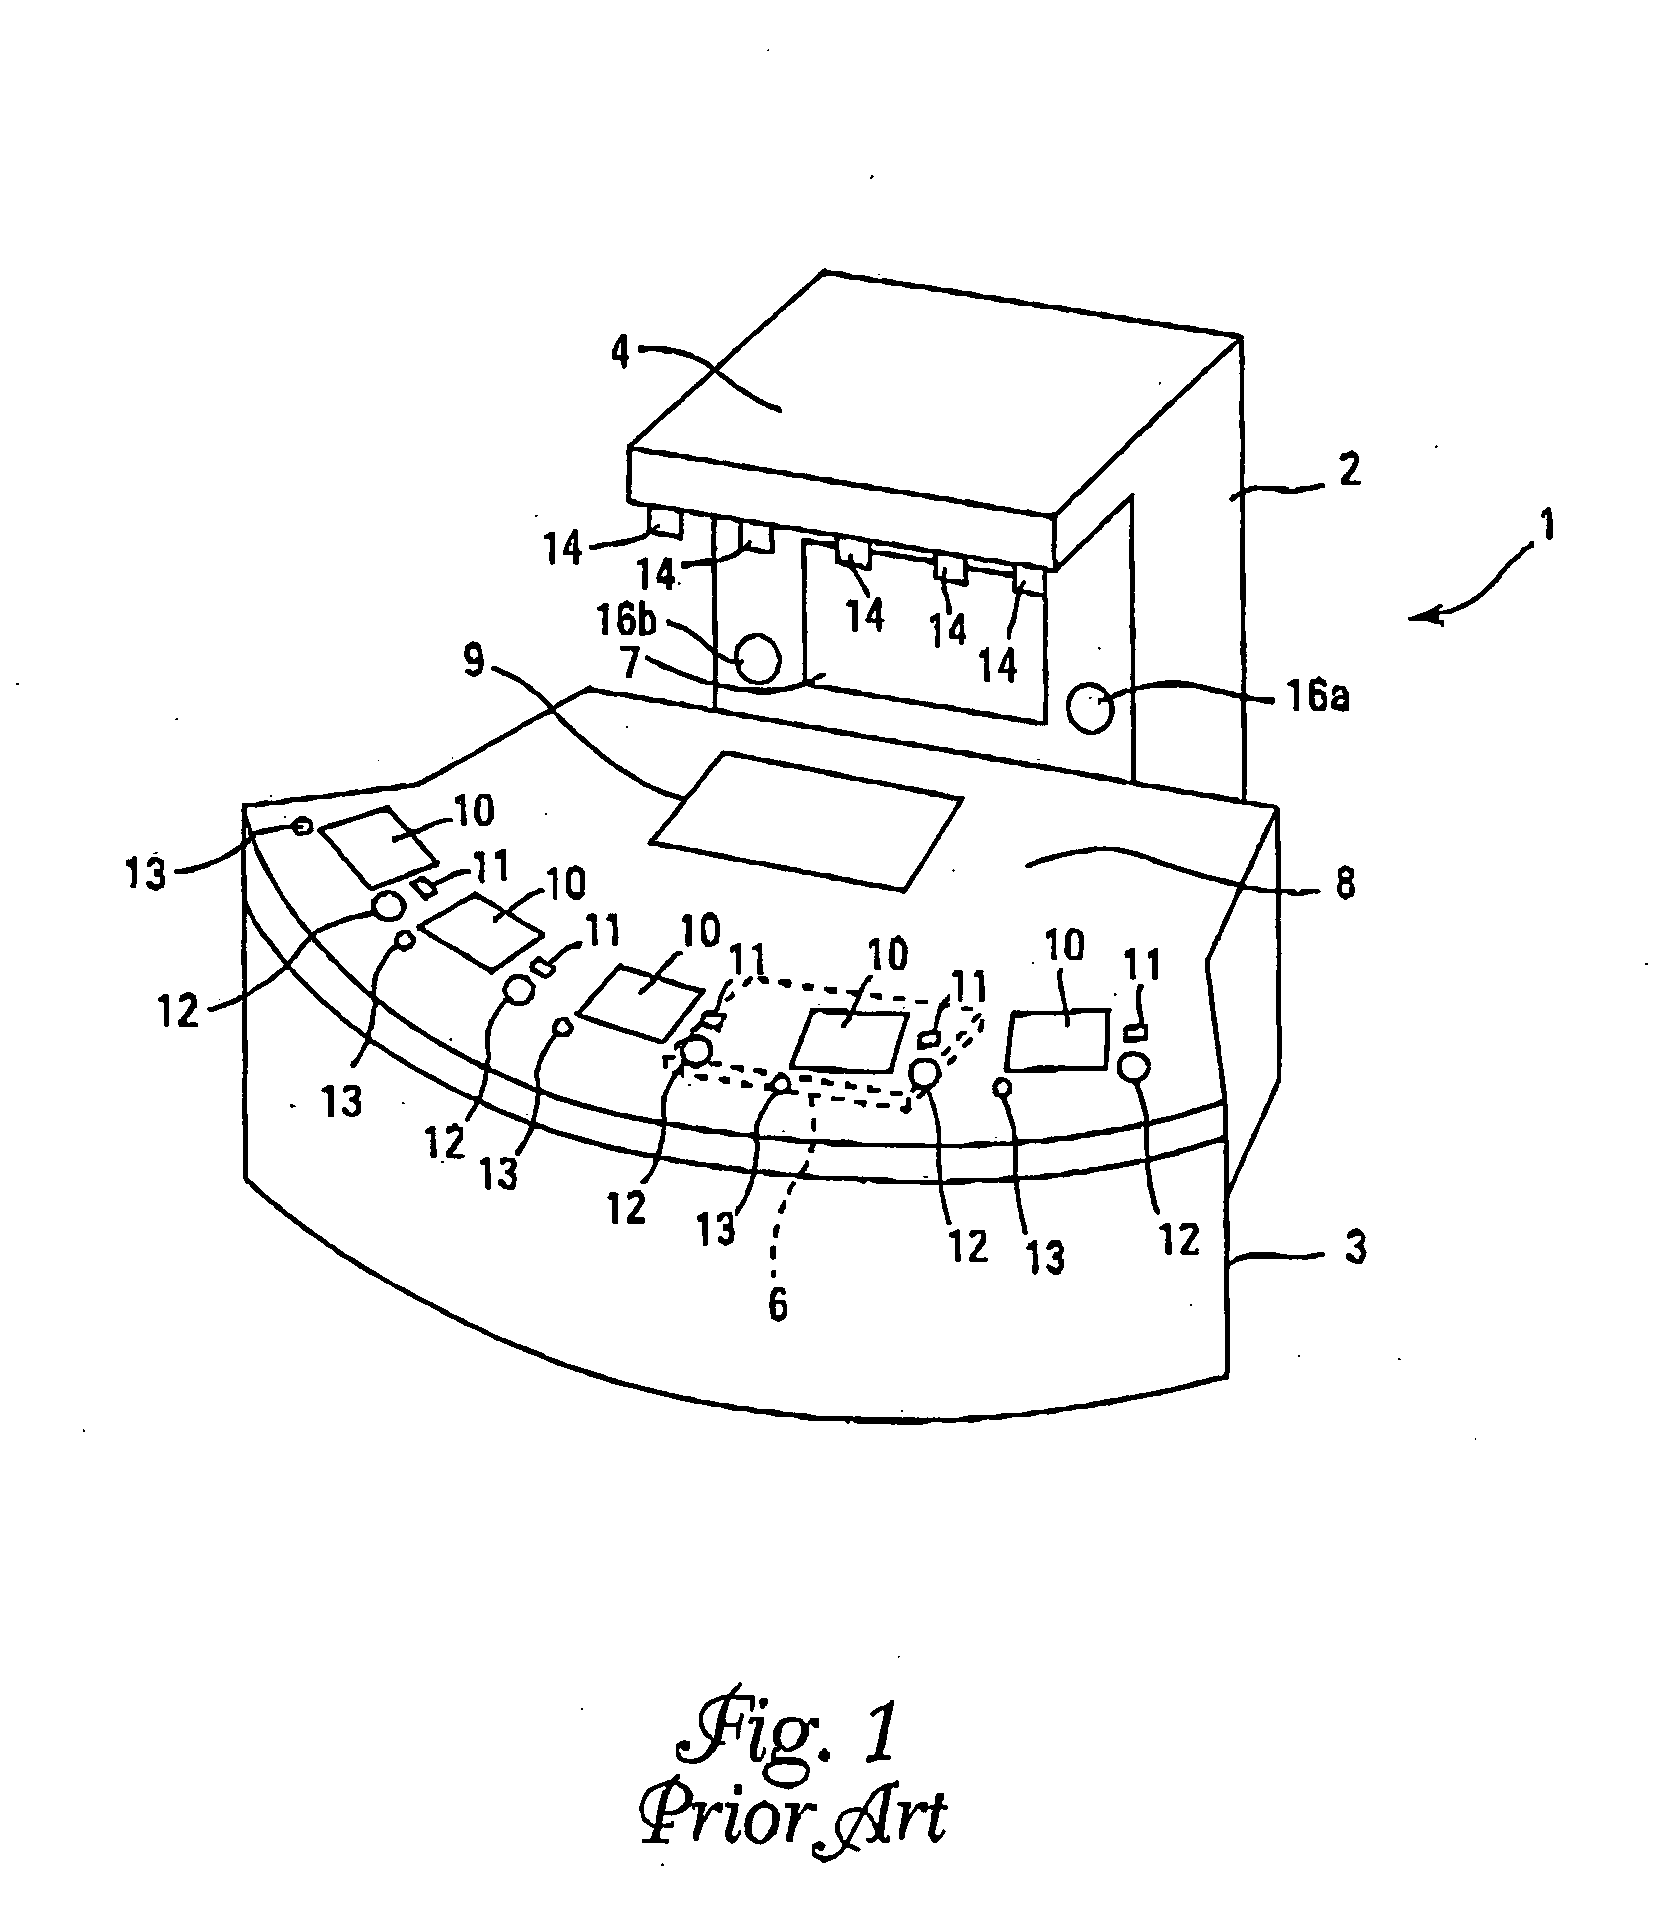 Interactive simulated stud poker apparatus and method